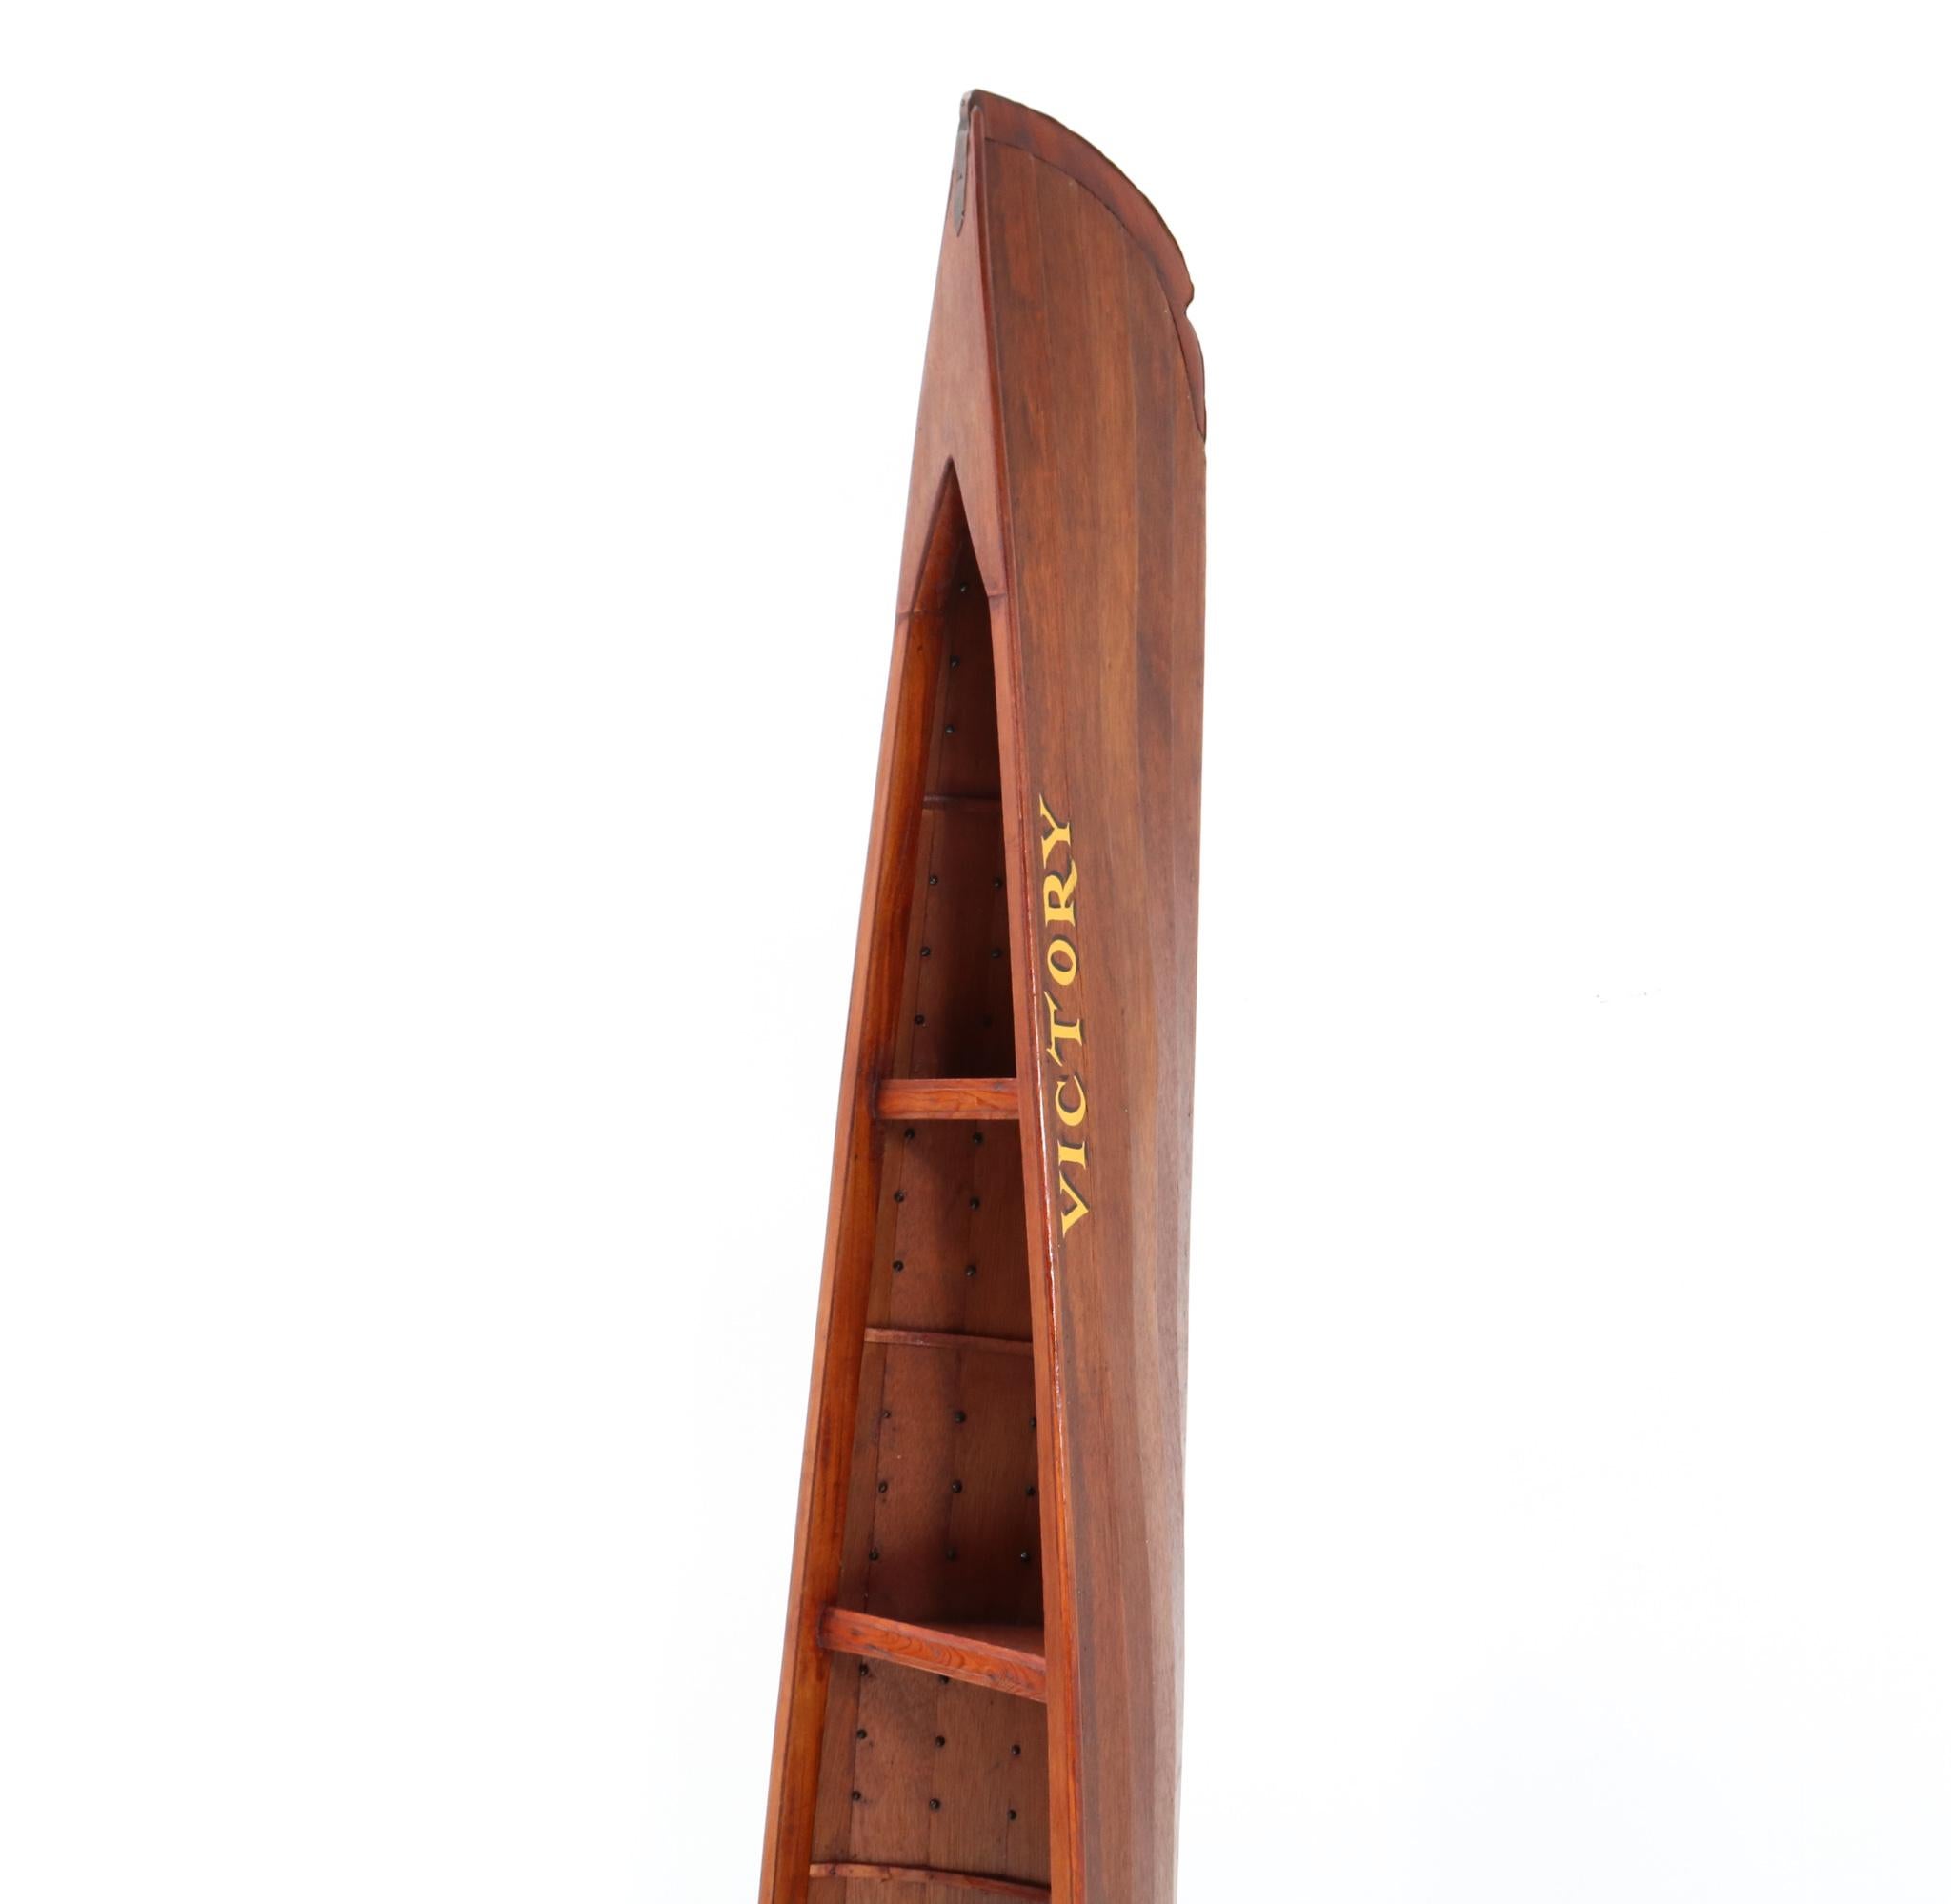 Stunning Vintage half boat bookcase.
Striking English design from the late 20th Century.
Resembling half a canoe boat, this unusual solid teak bookshelf is
characterised by its ascending bow and hull shelves which echo the
position of the boat's